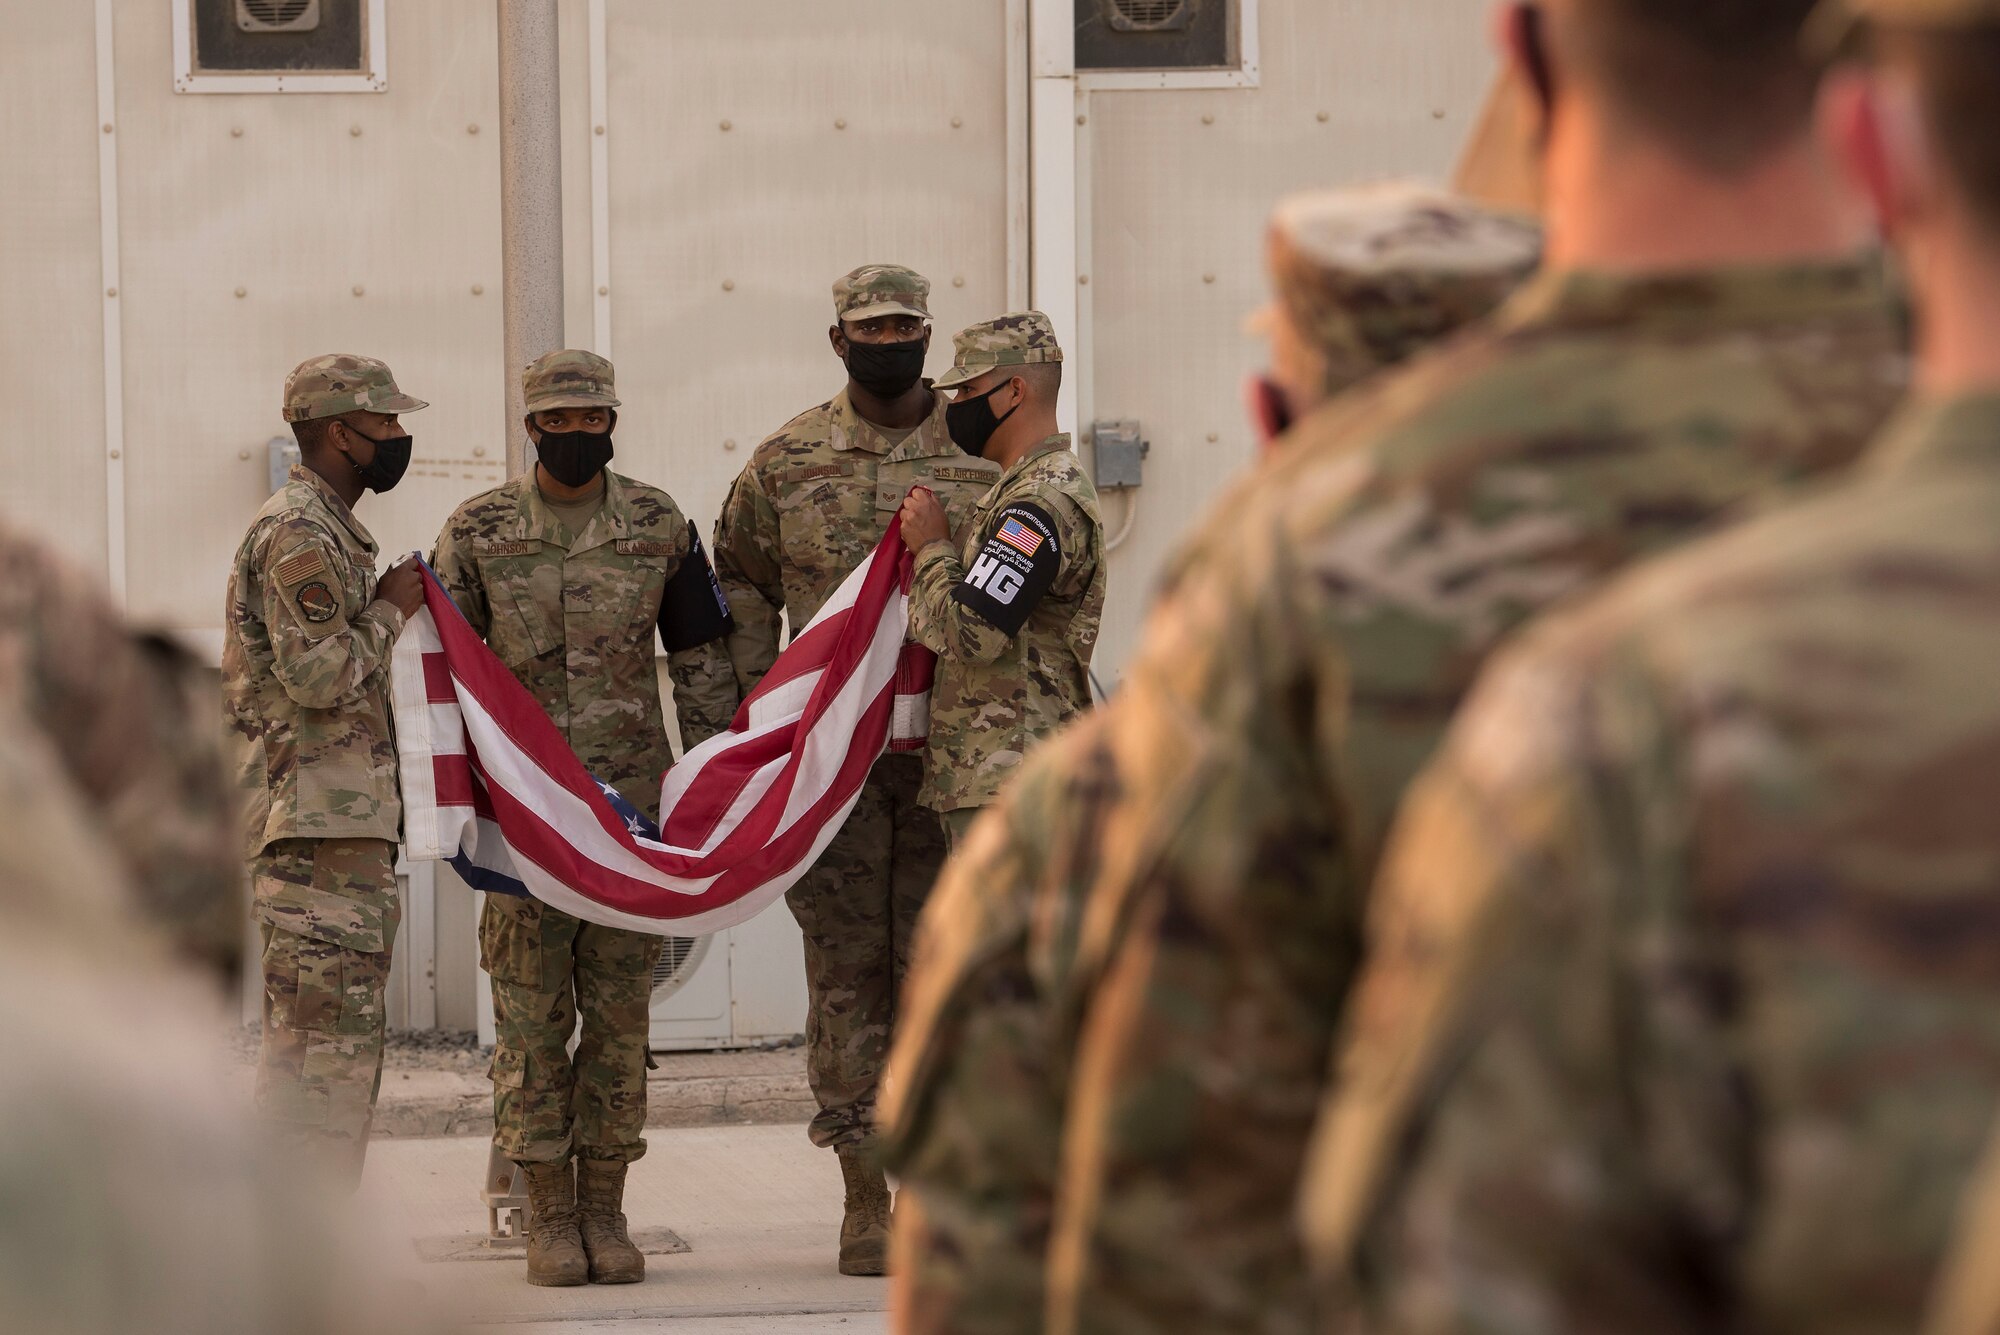 Members of the 380th Air Expeditionary Wing Honor Guard fold an American flag as part of a retreat ceremony in honor of Veterans Day at Al Dhafra Air Base, United Arab Emirates, Nov, 11, 2020.